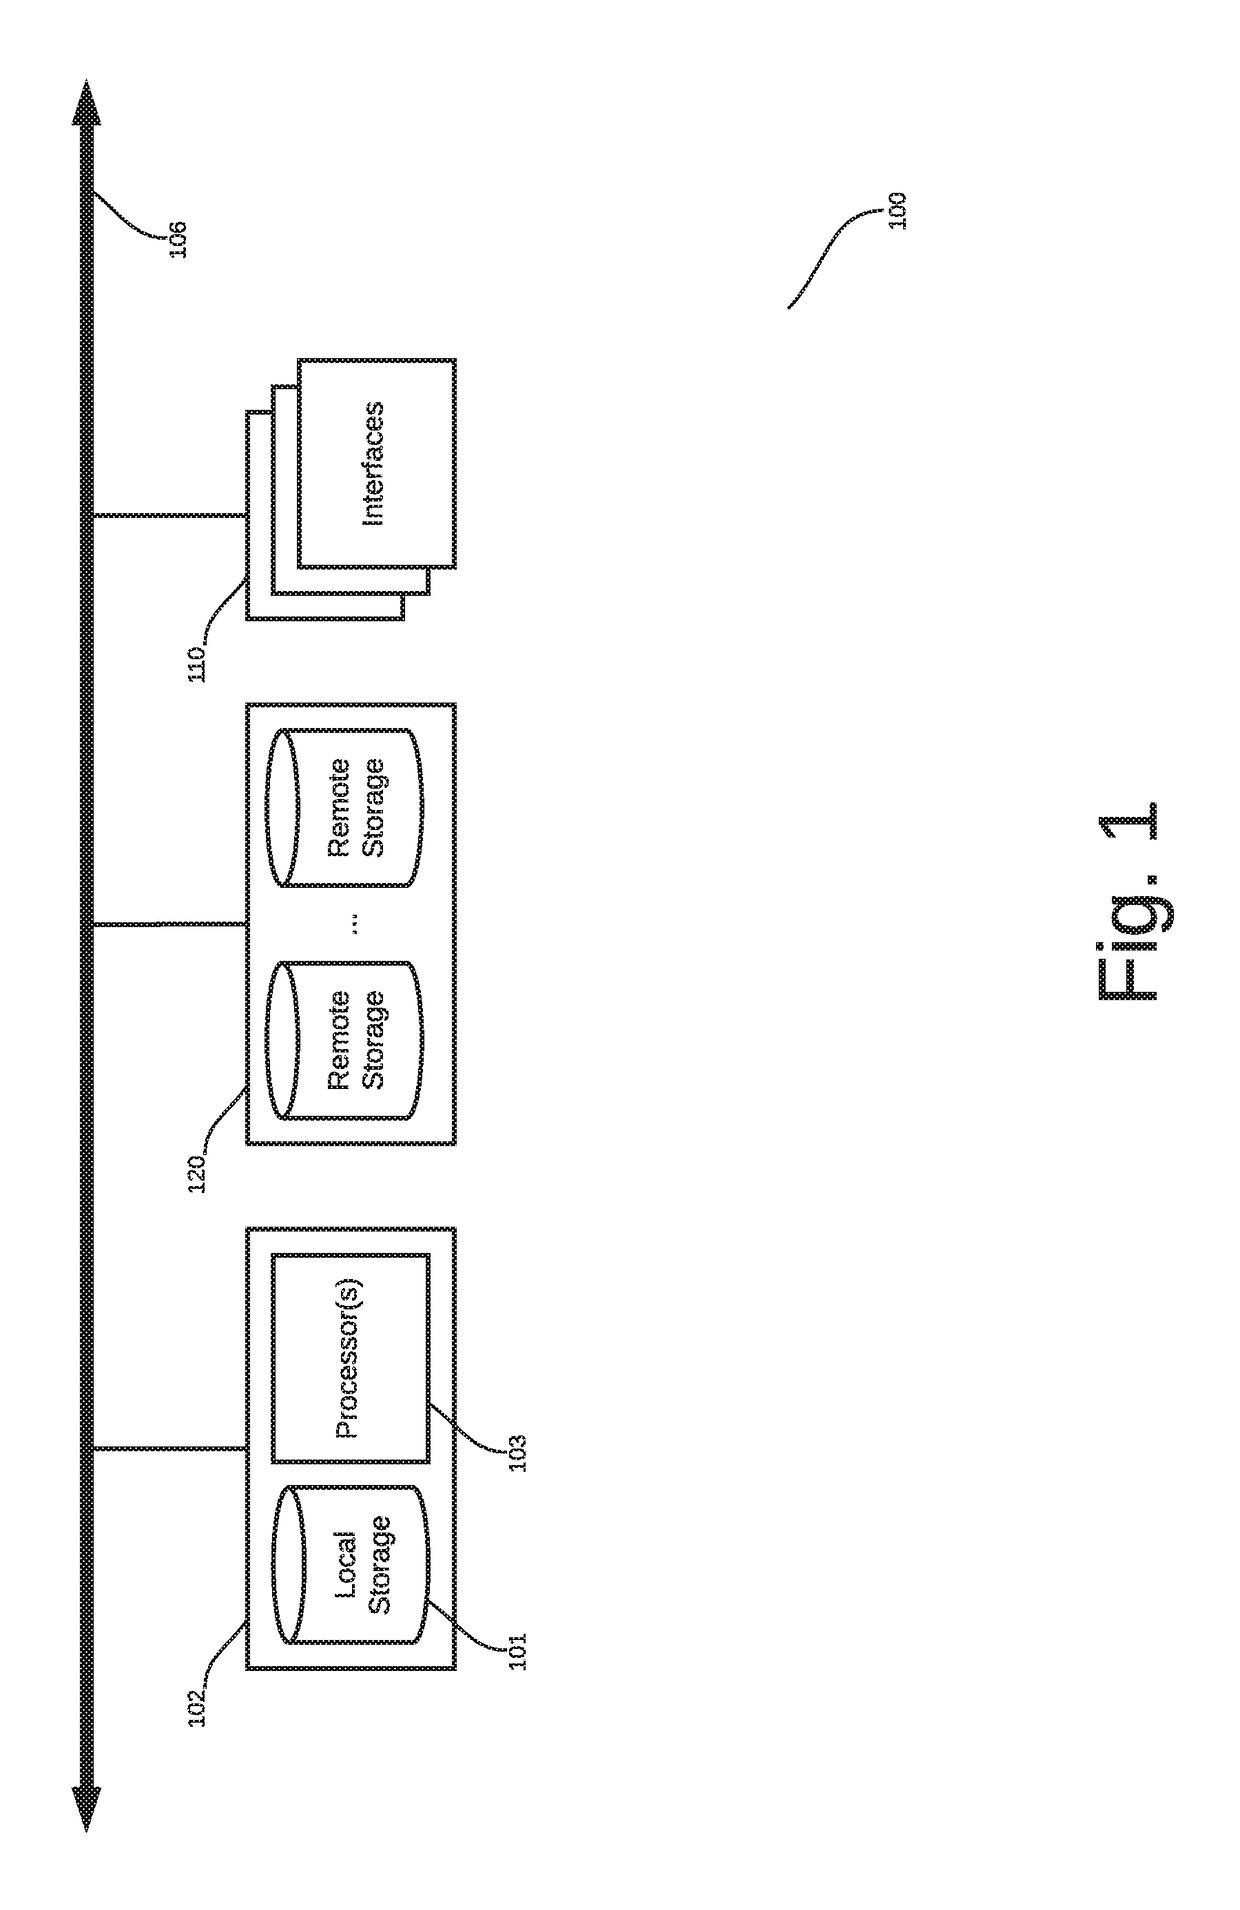 System and method for computational disambiguation and prediction of dynamic hierarchical data structures